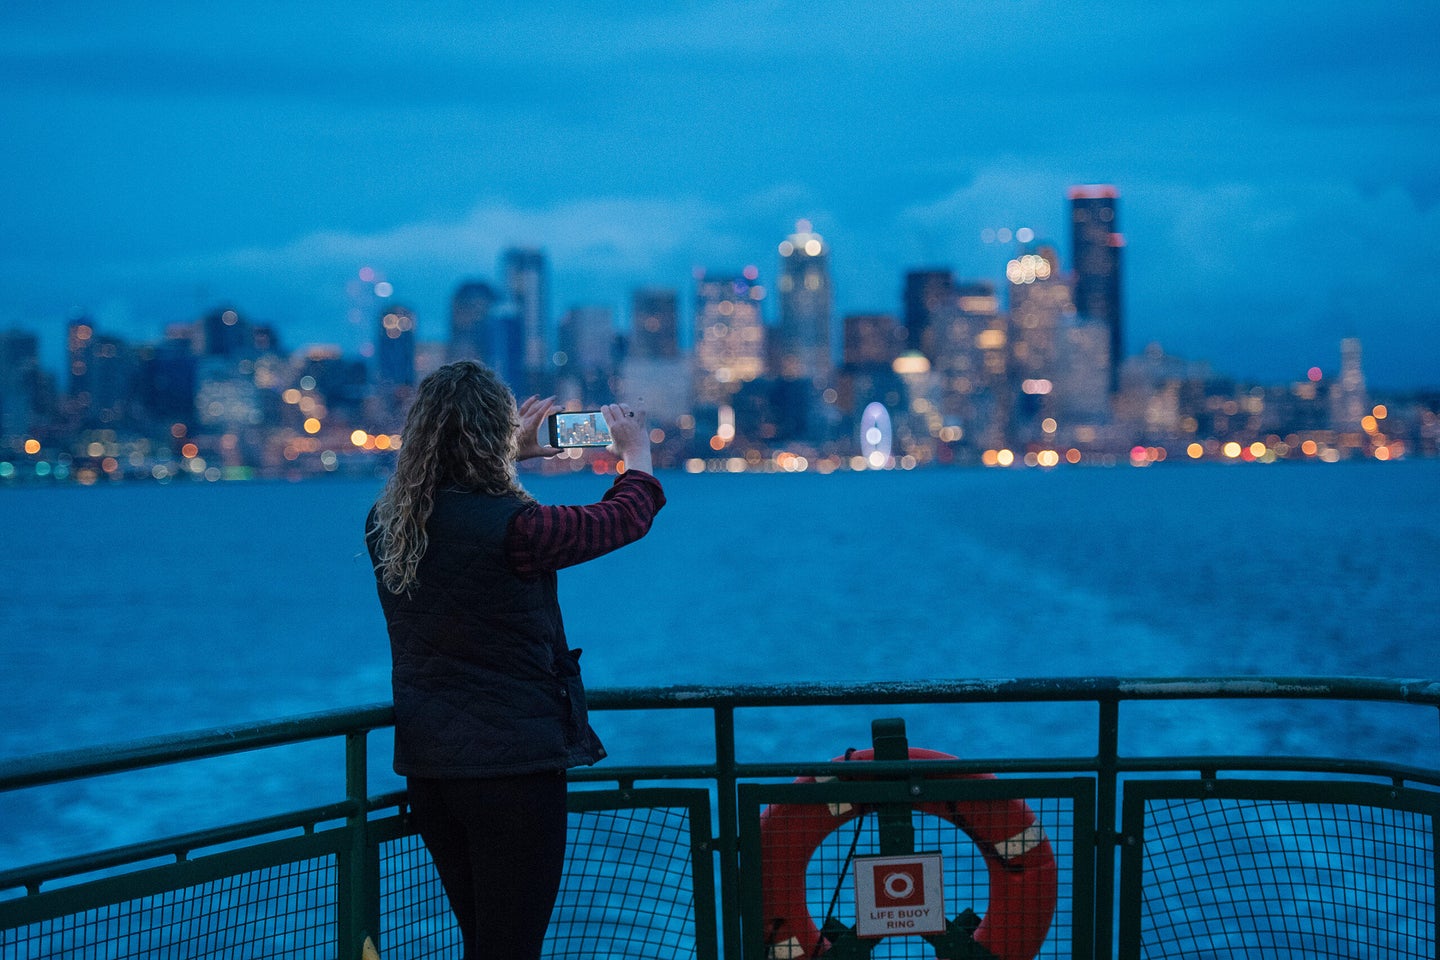 A women shooting a smartphone photo at dusk